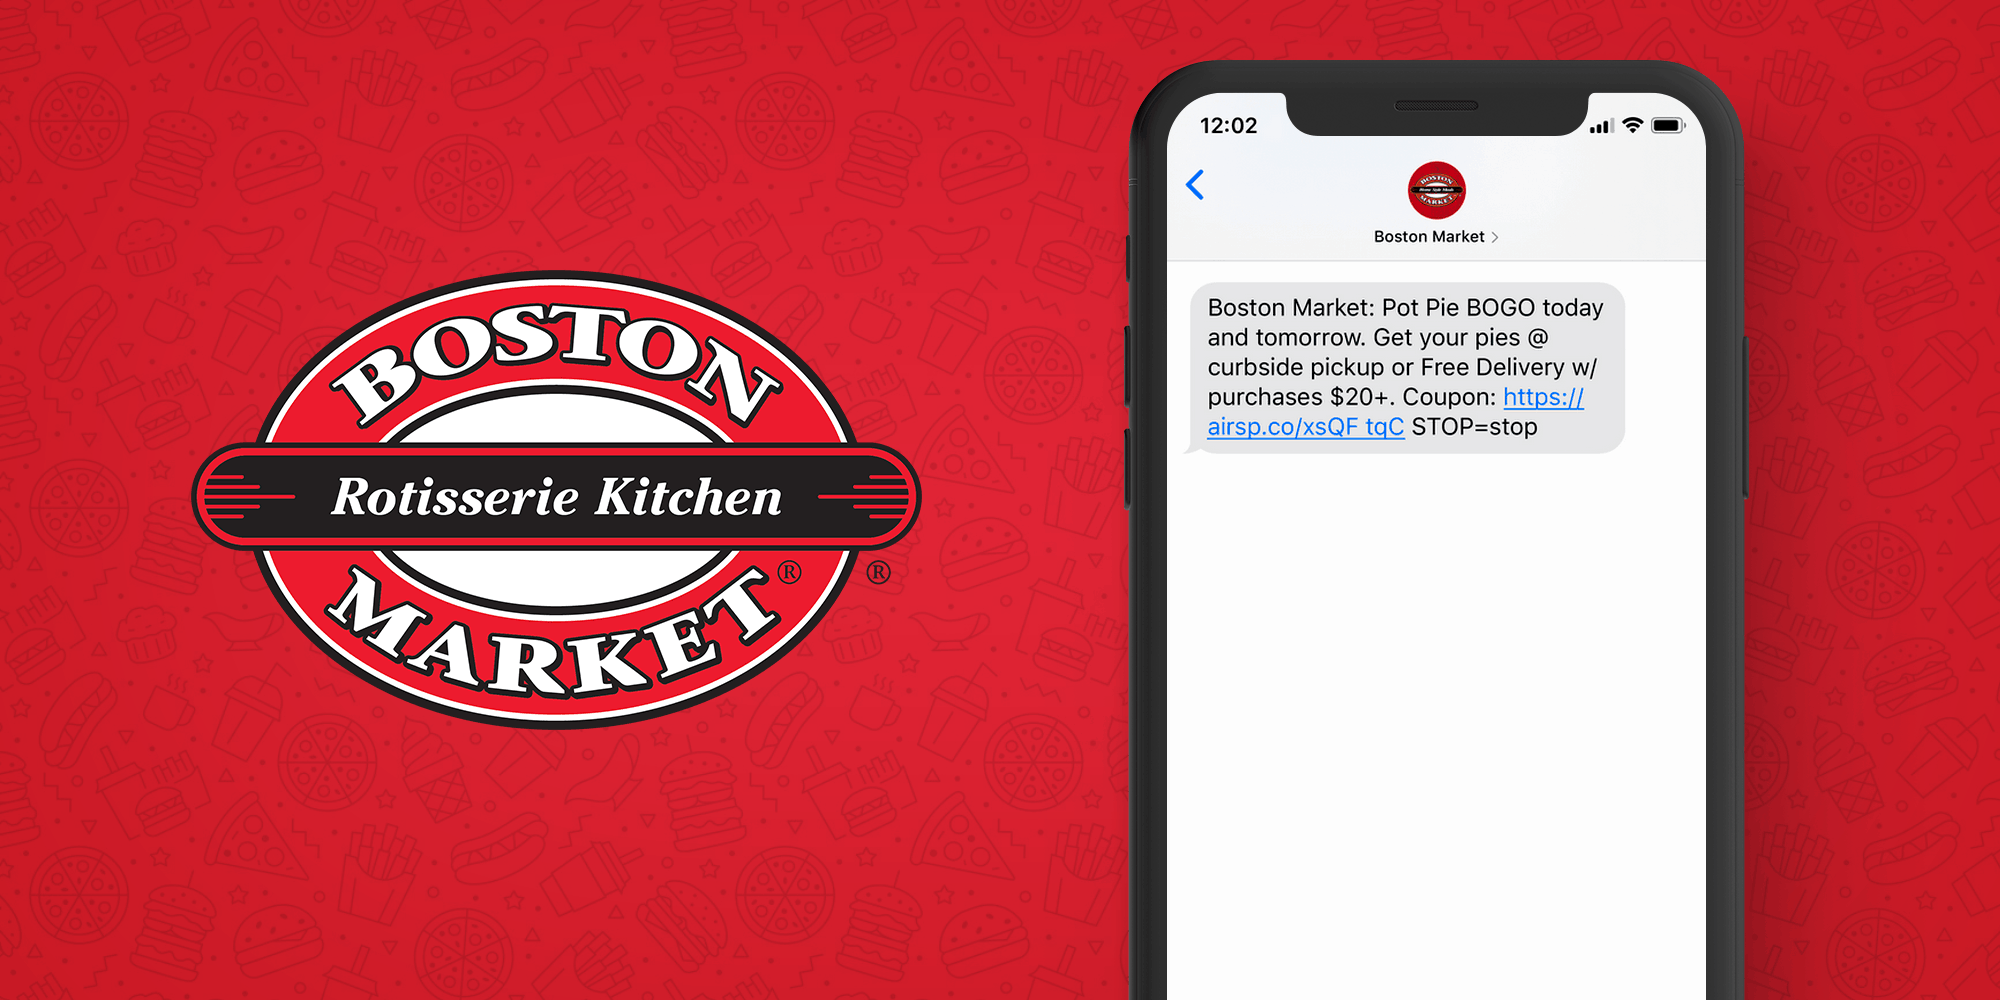 Boston Market SMS Marketing Example - 50 Examples of Brands Using SMS Marketing